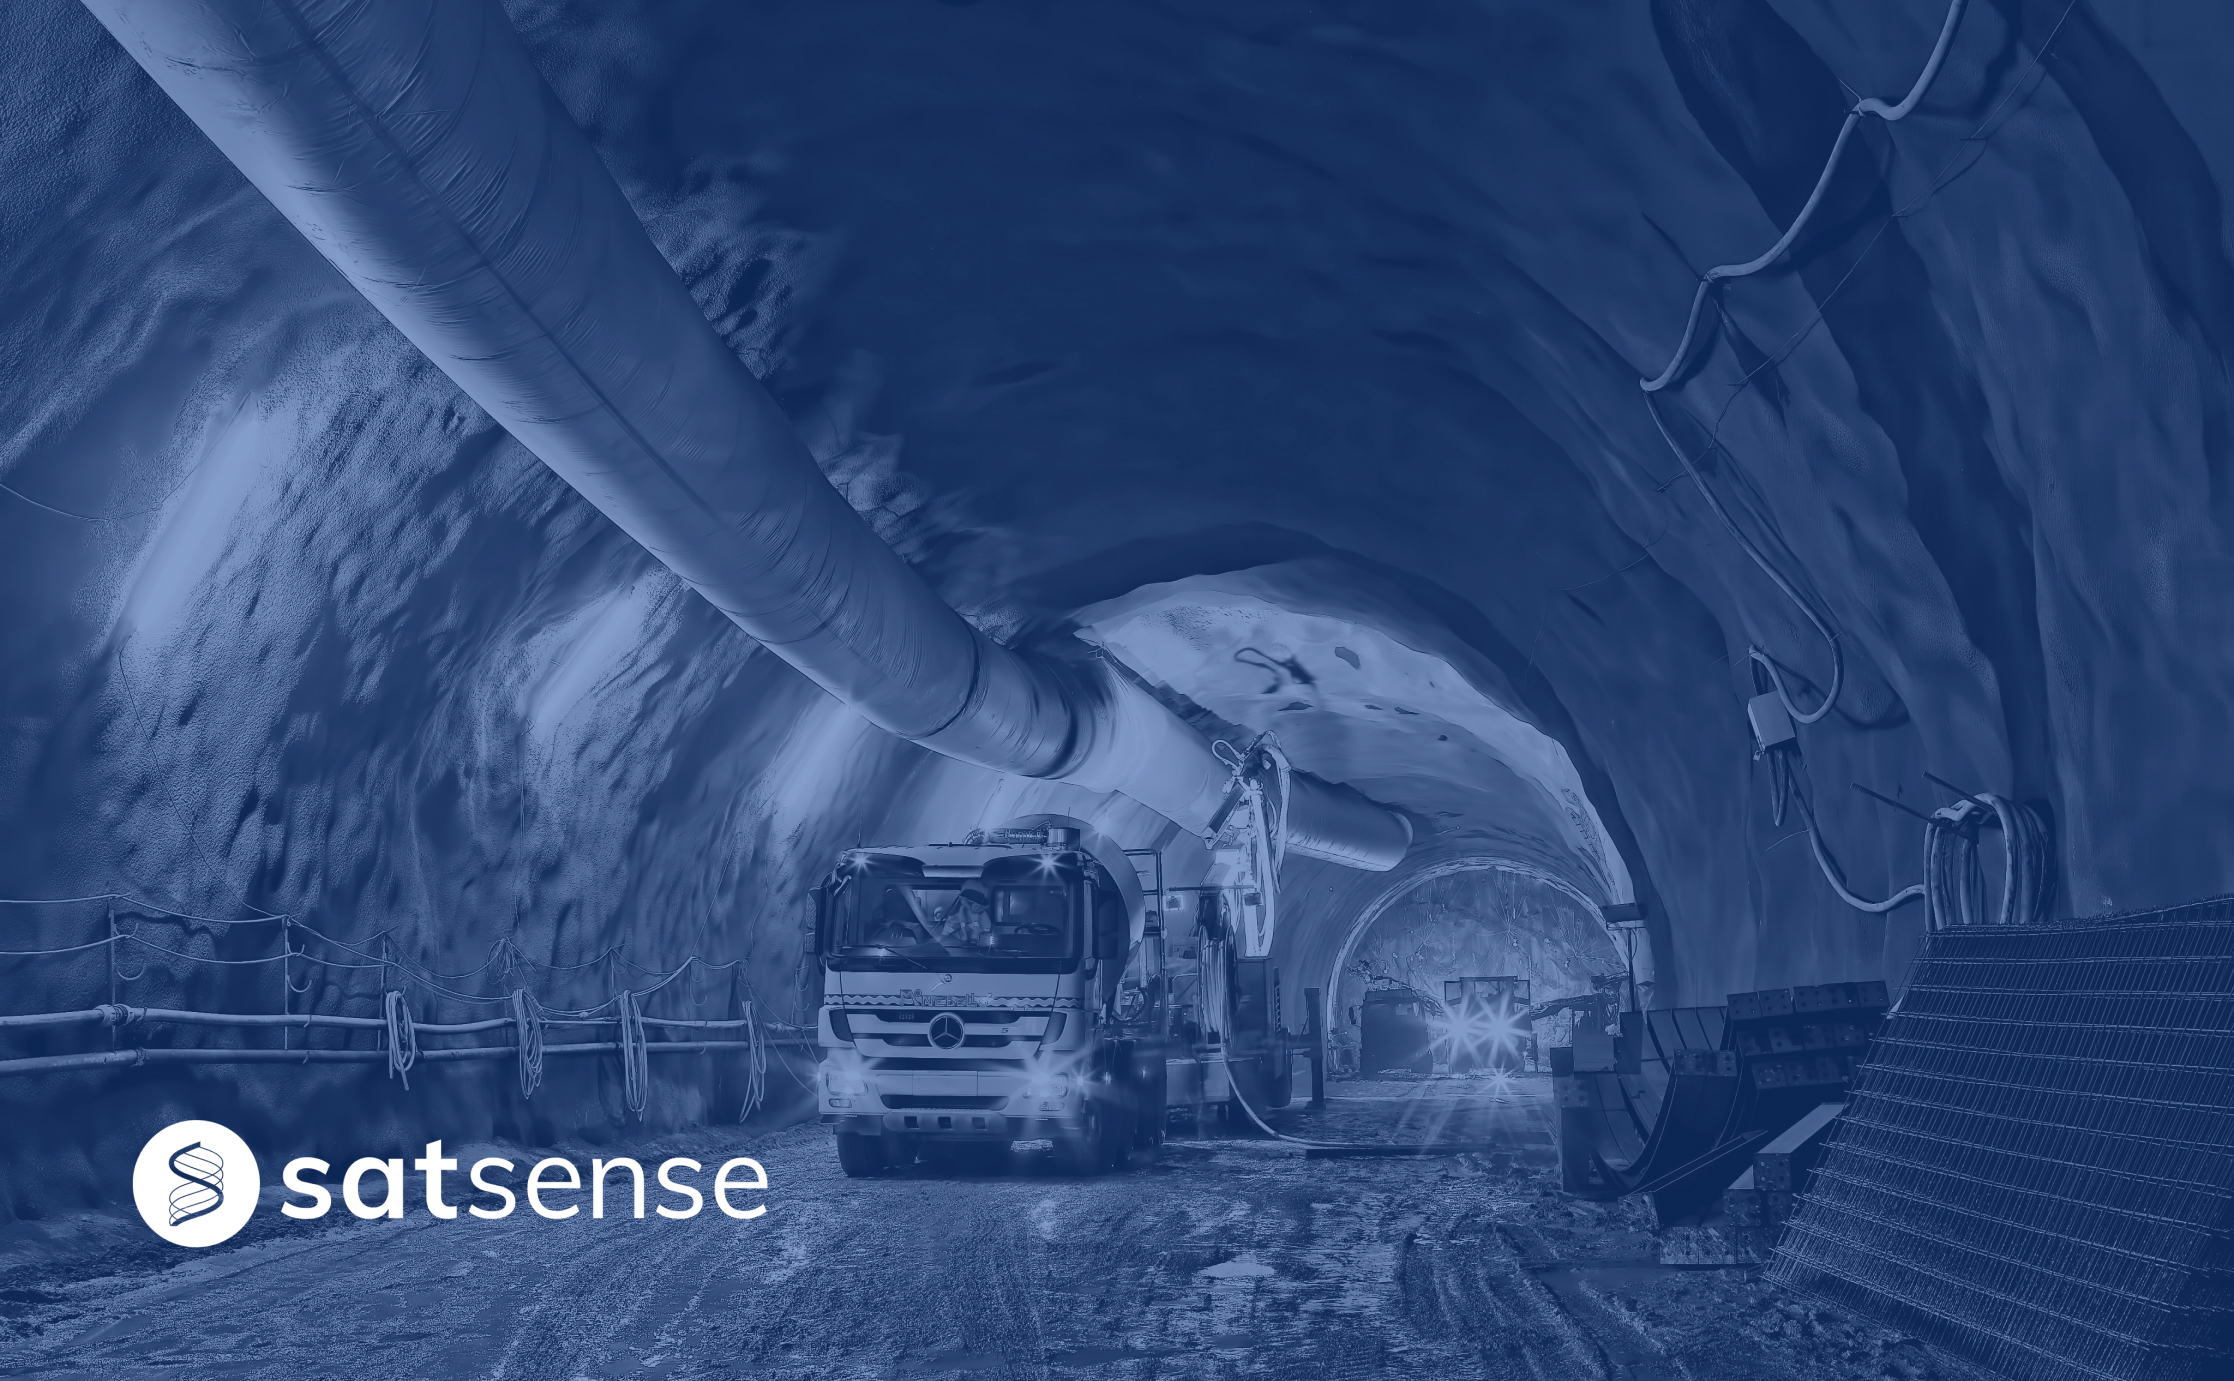 Tunnel at a mining site with SatSense logo on the bottom left corner